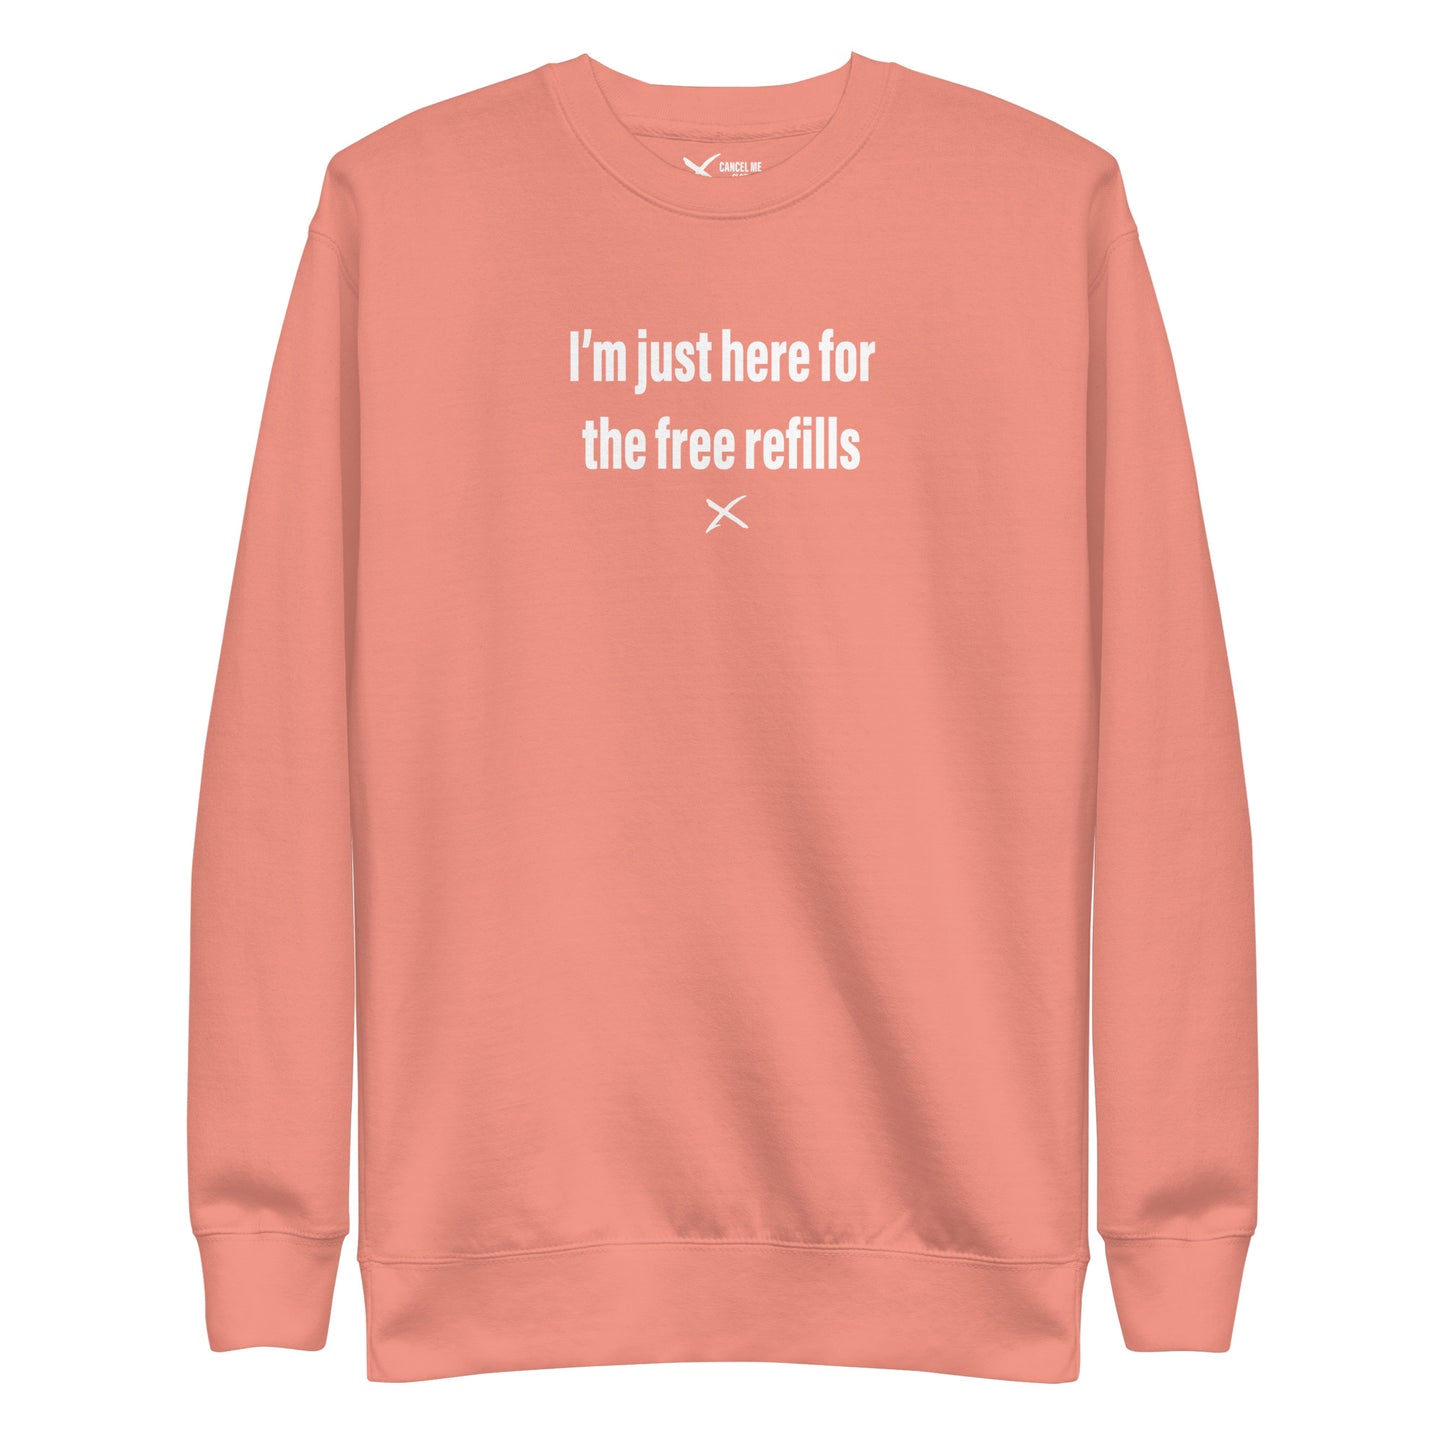 I'm just here for the free refills - Sweatshirt